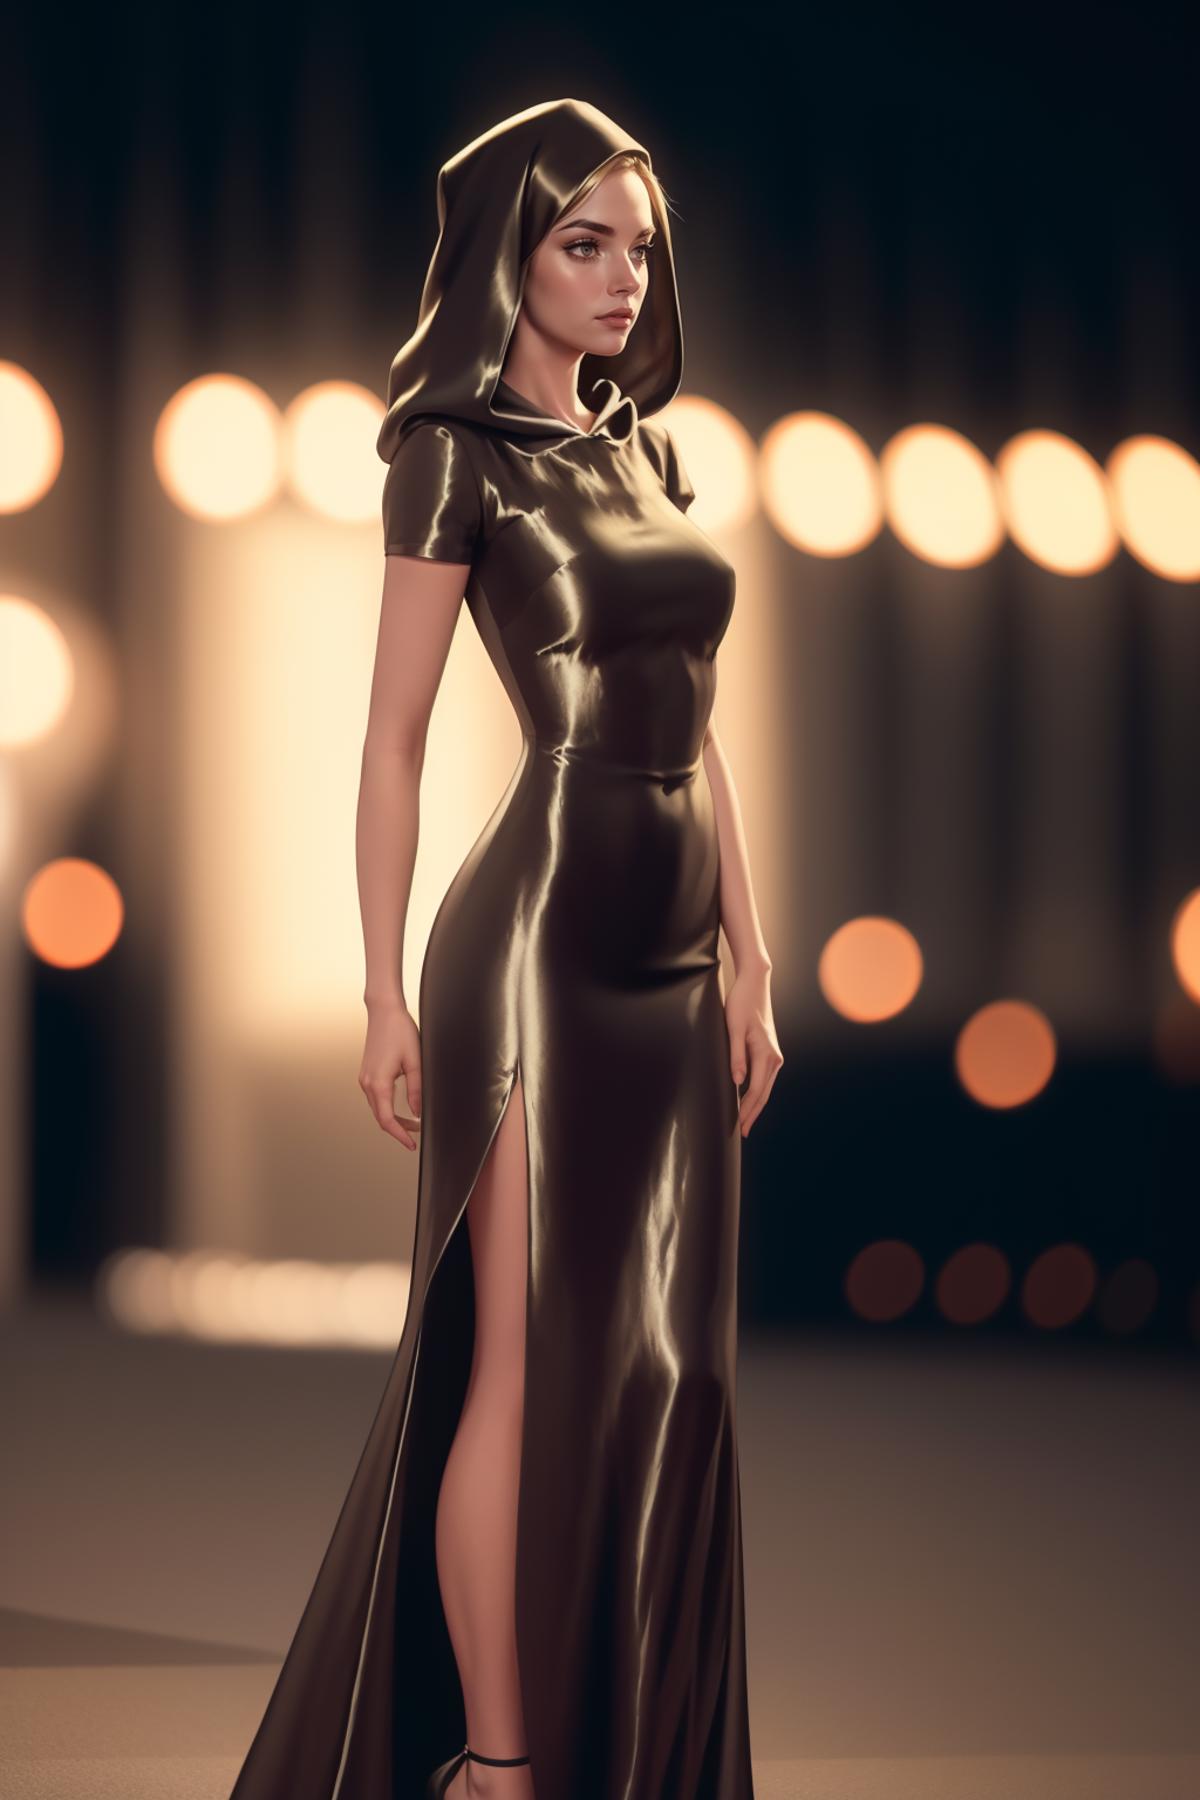 Met Gala Dress | Gold In Theory Only image by Sophorium